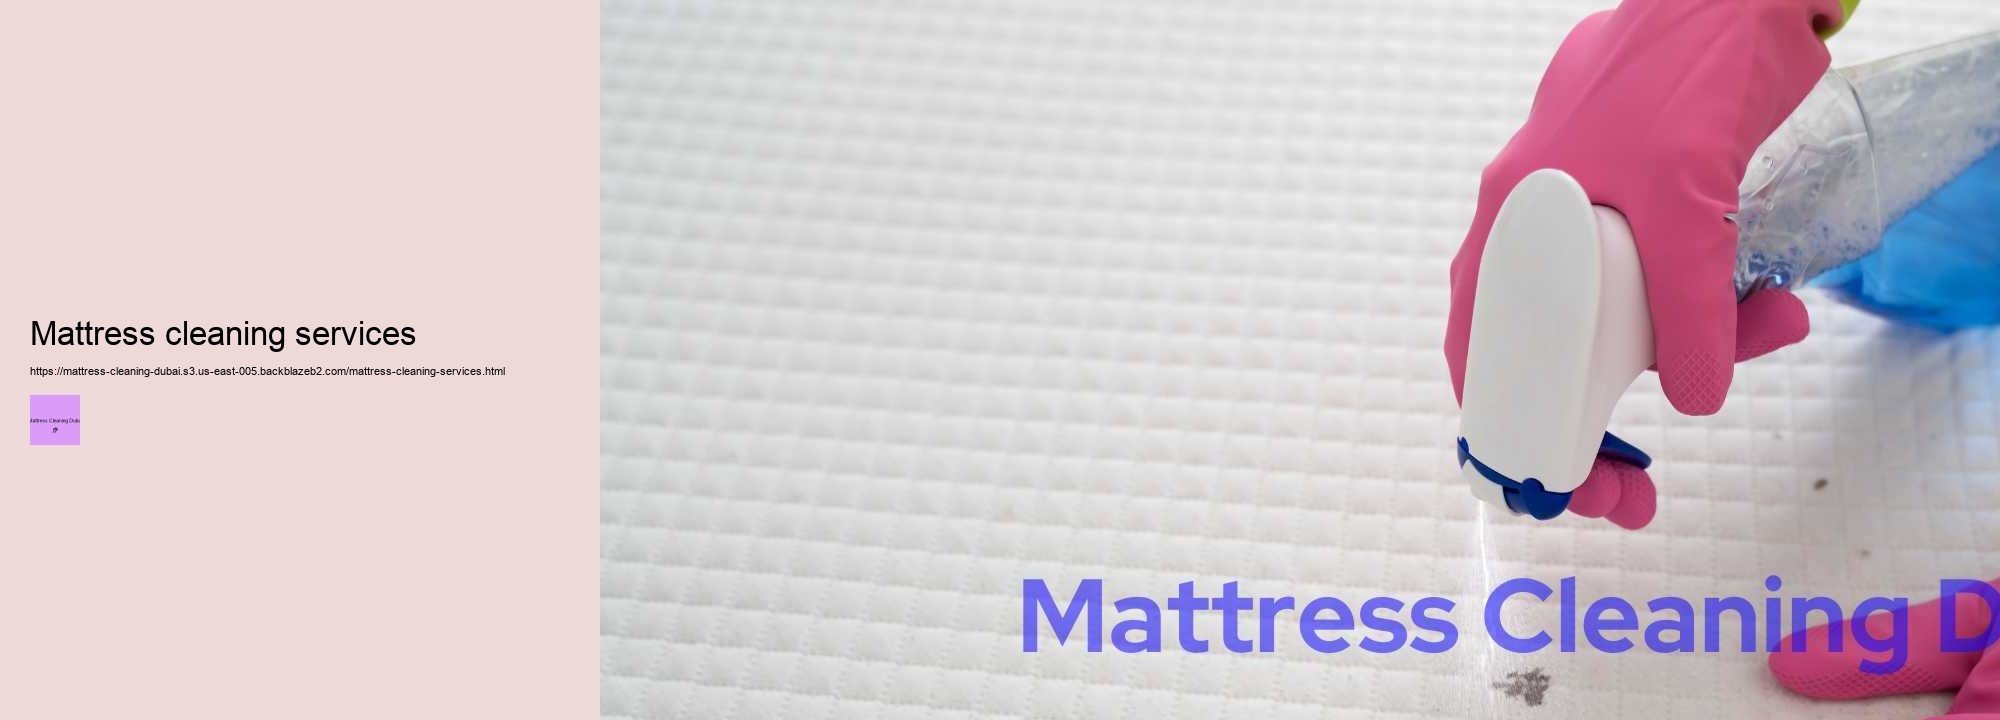 Mattress cleaning services